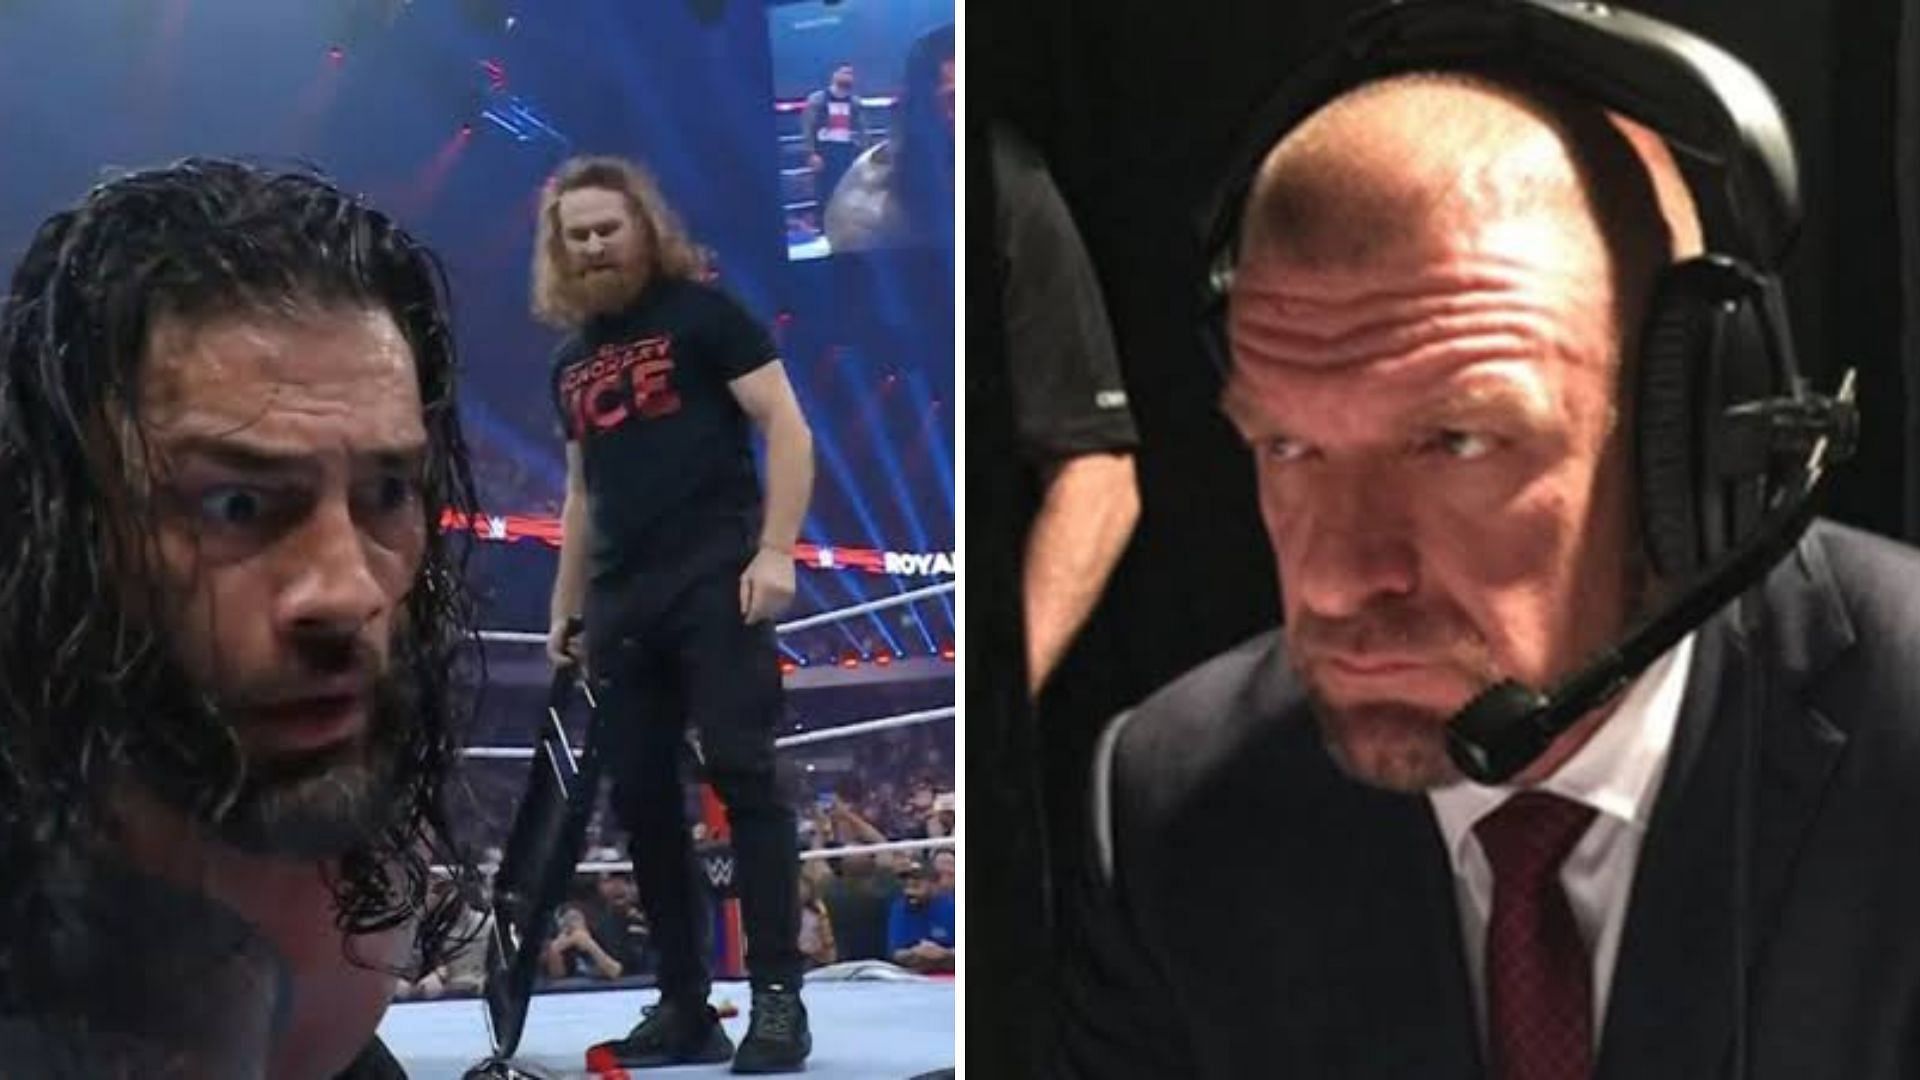 Royal Rumble 2023 had an emotional and unexpected end.